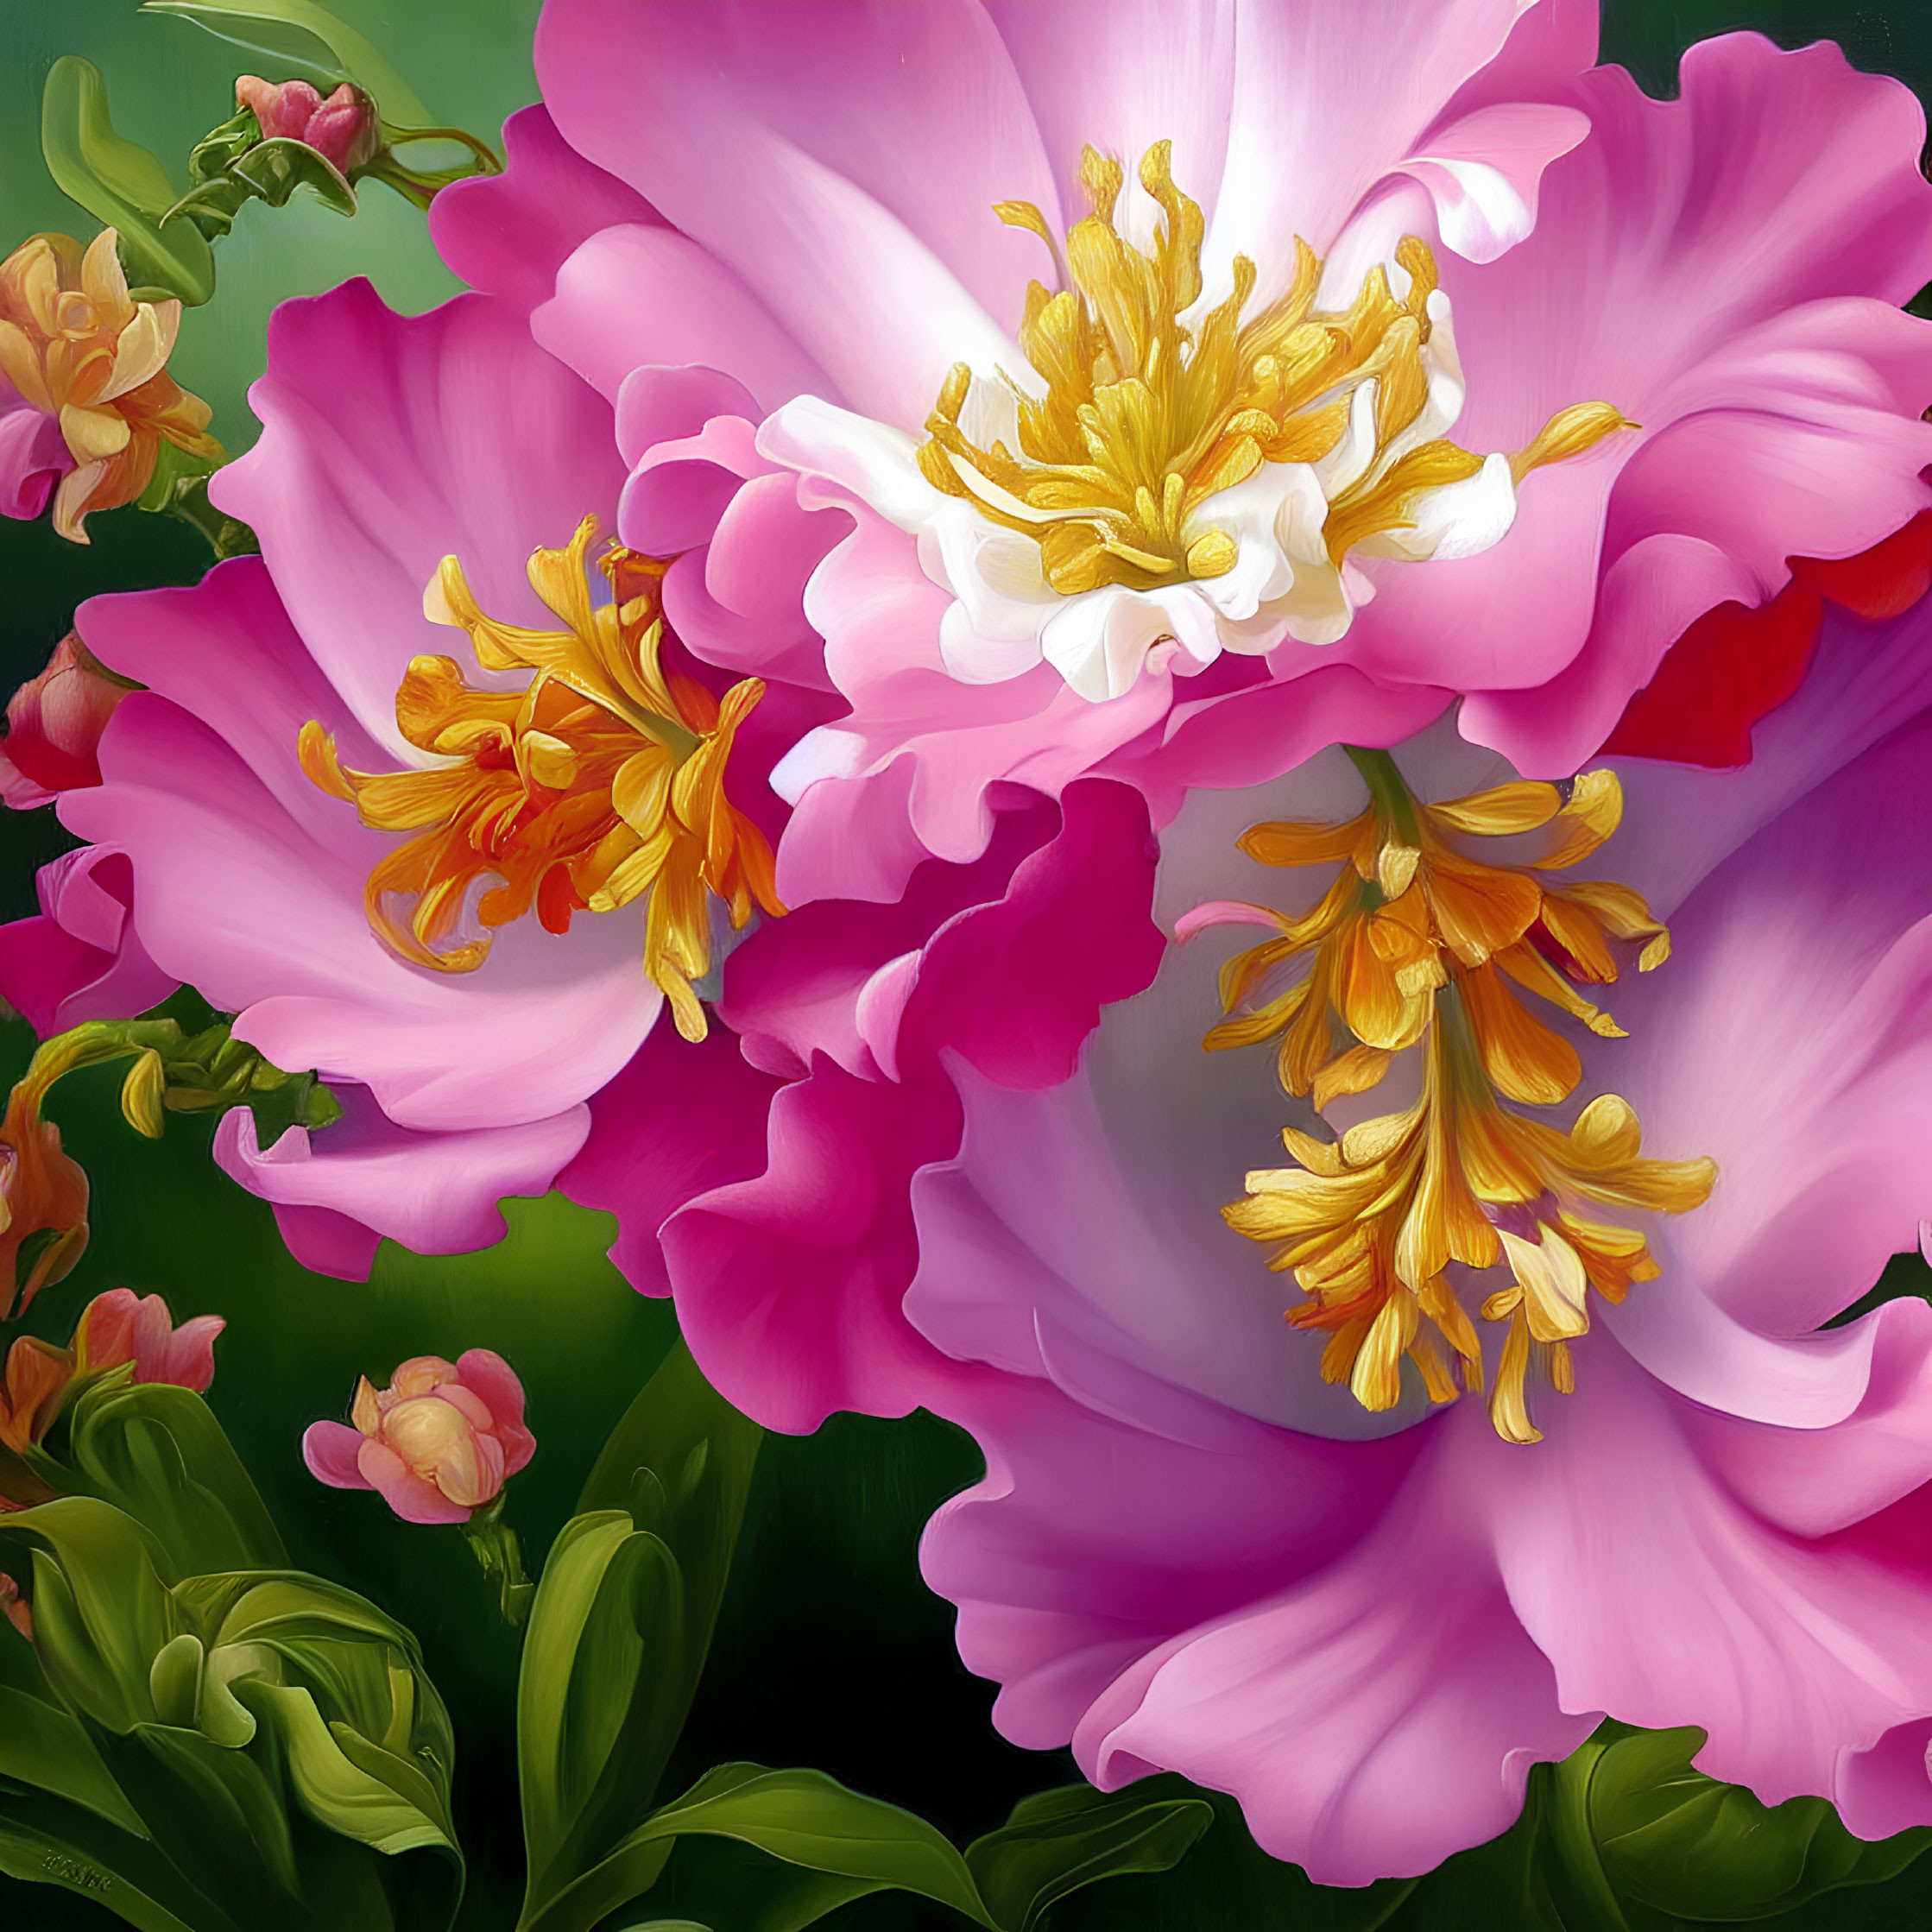 Bright pink peonies with golden stamens on green background